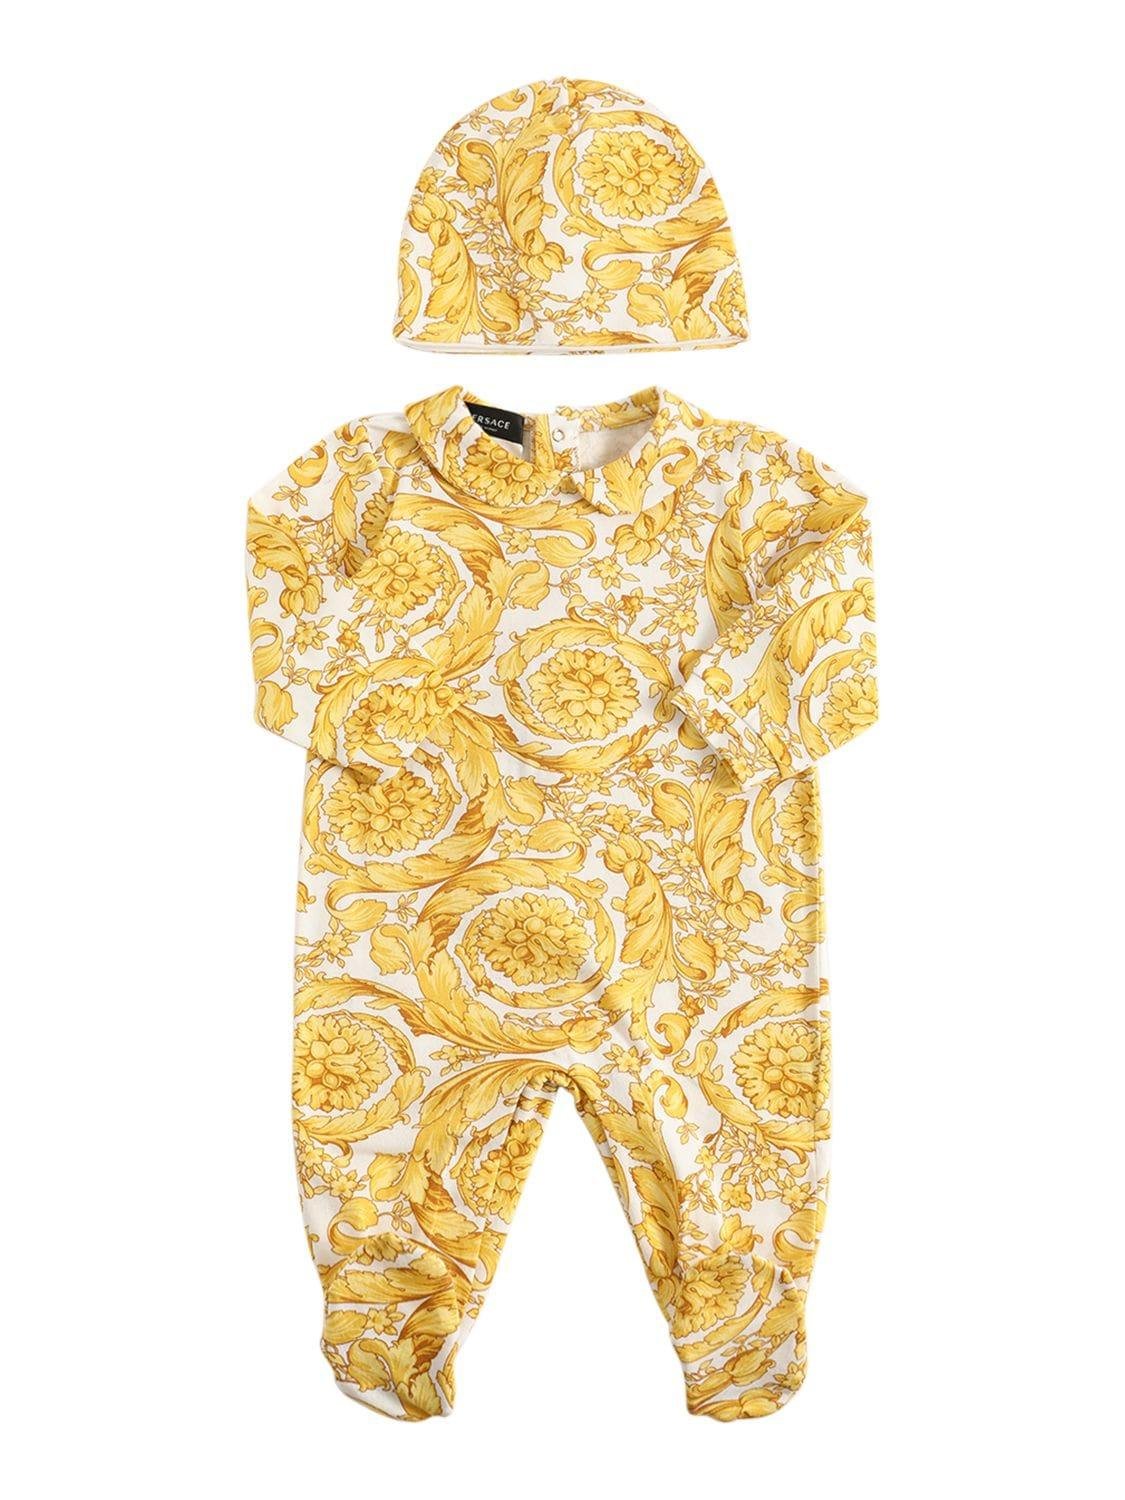 Barocco Printed Cotton Romper & Hat by VERSACE